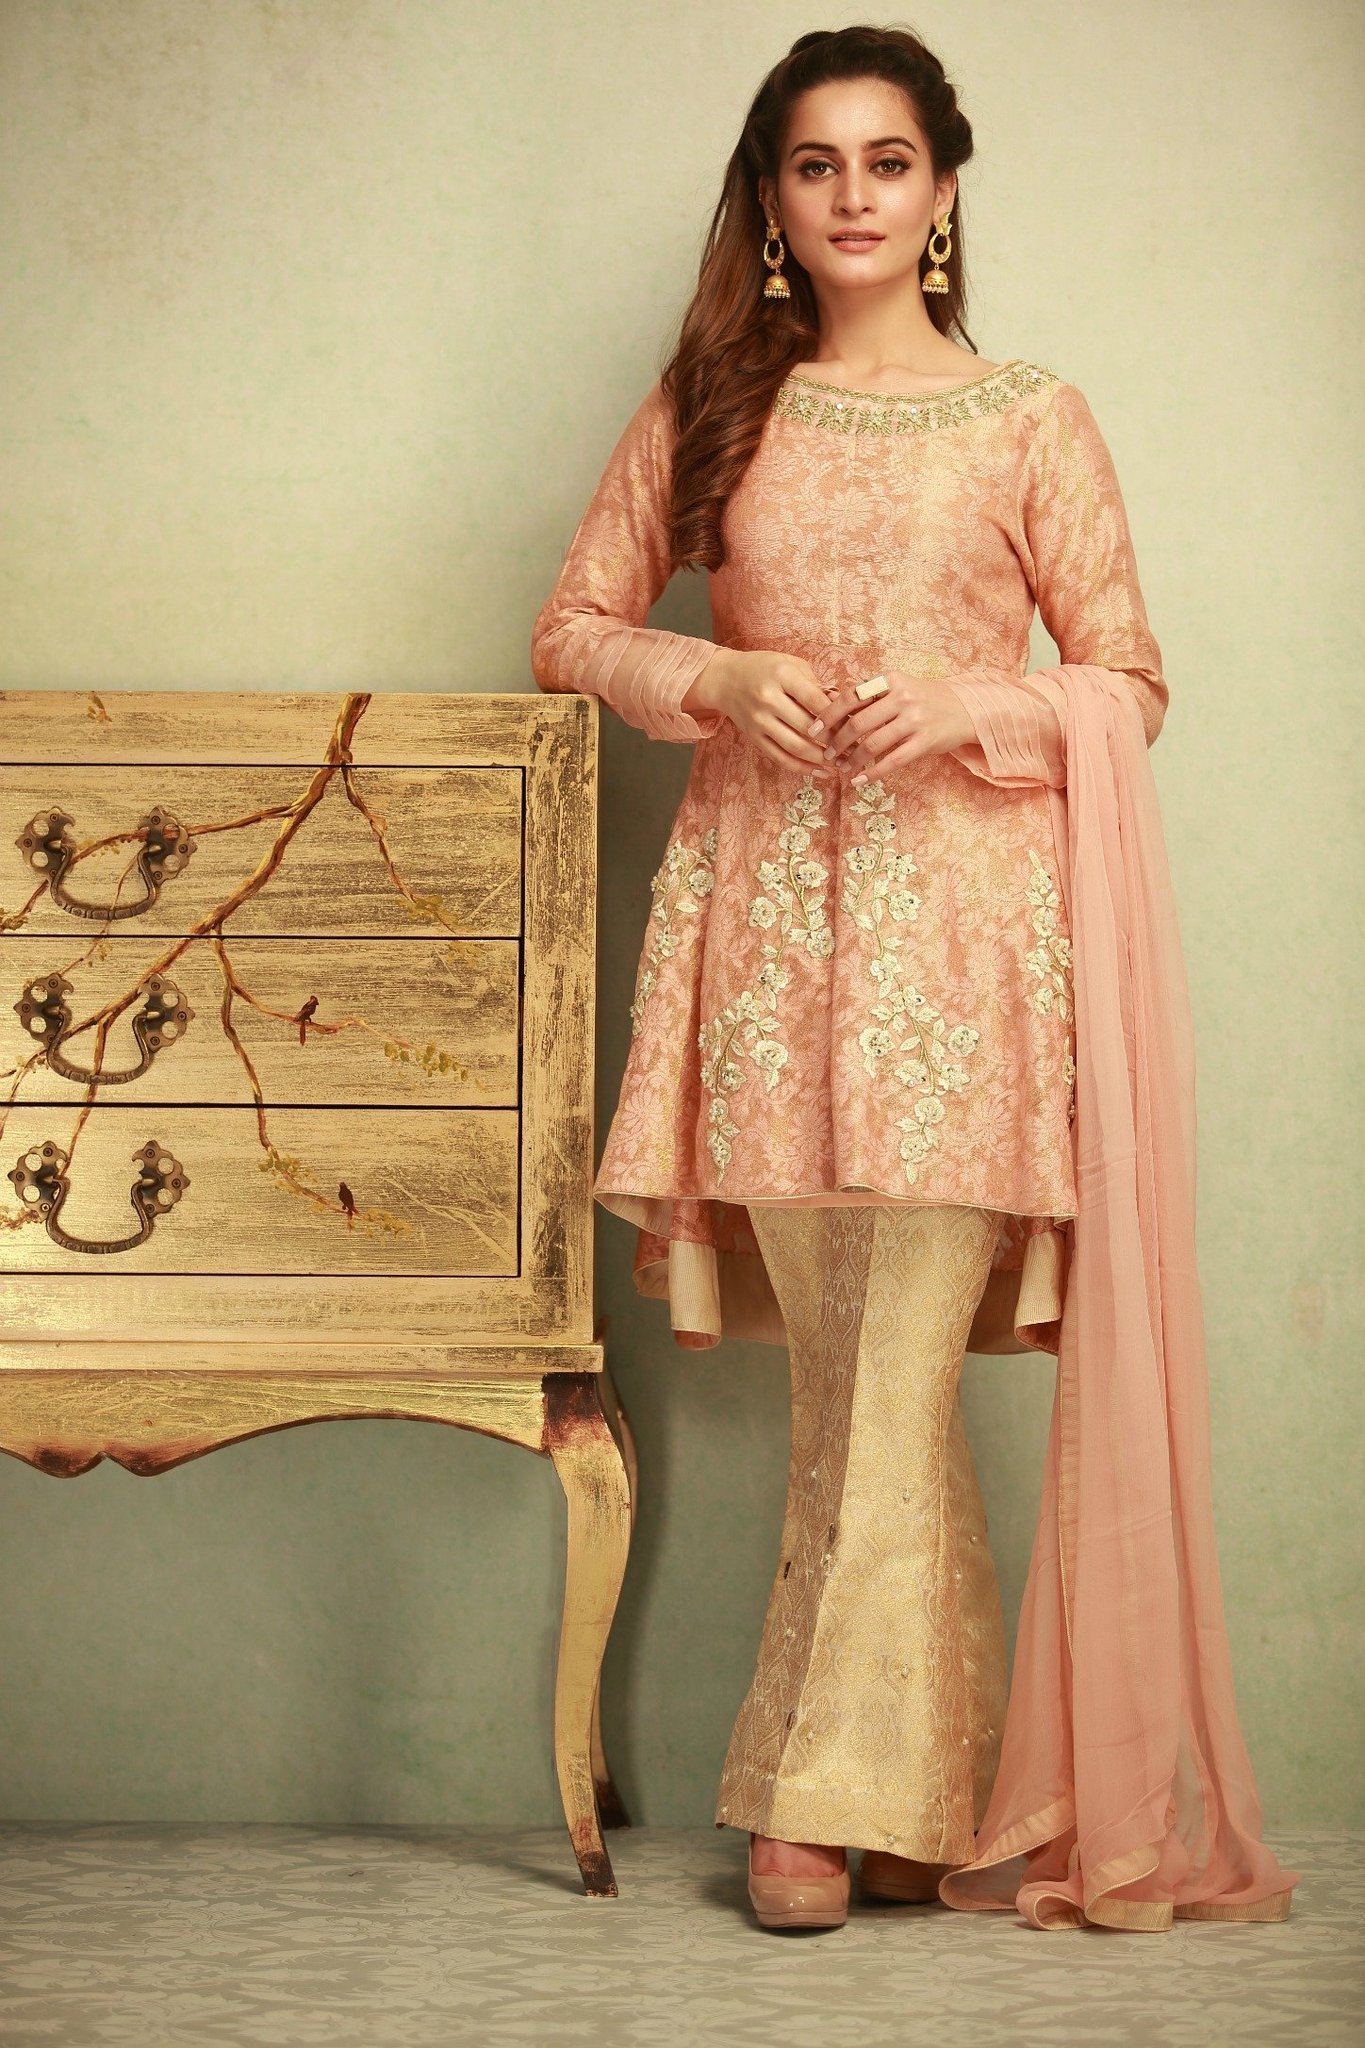 Glossy Pink Luxre Pret Pakistani Wedding Dress in Short Length by Phatyma Khan